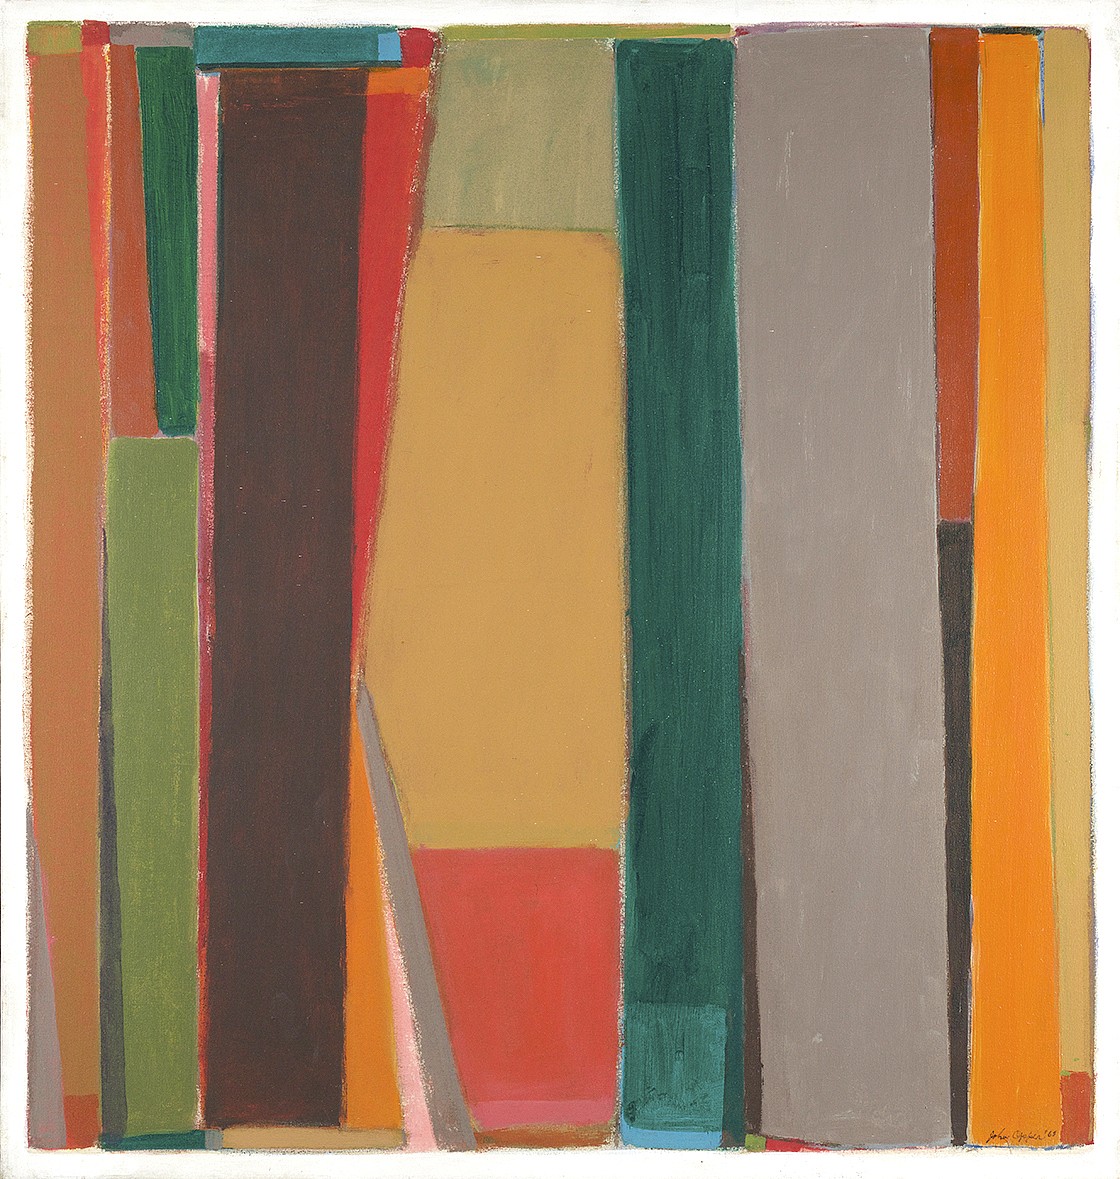 John Opper: Paintings from the 1960s and 1970s